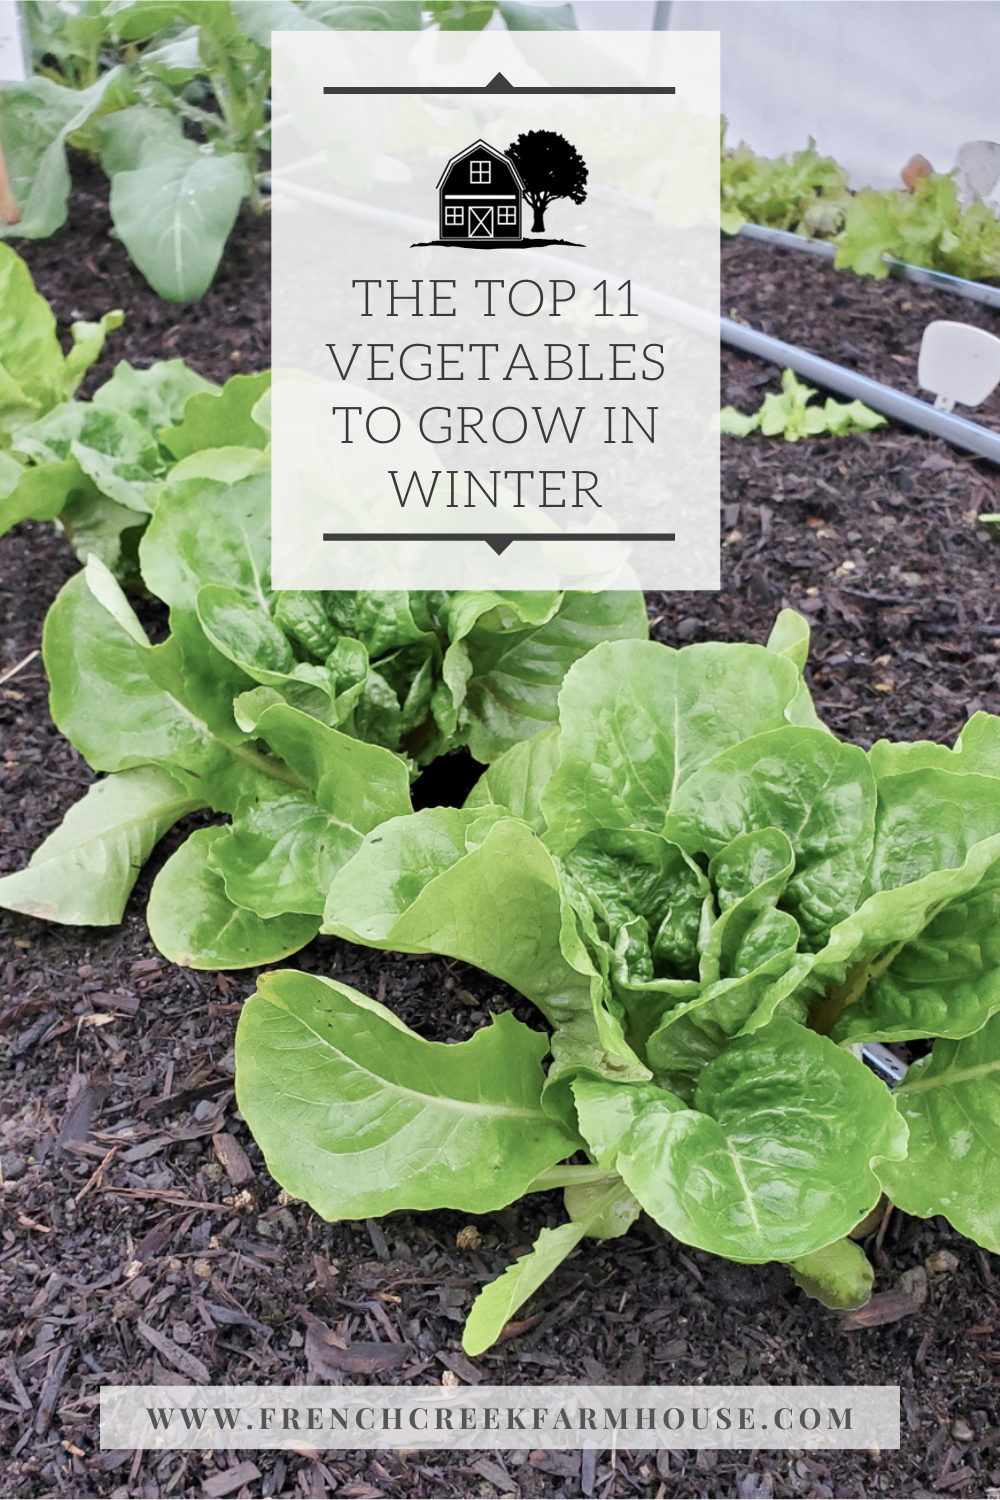 Growing vegetables during winter is not only possible, but also produces incredible flavors in cold temperatures. These 11 crops are the best to try for beginners!